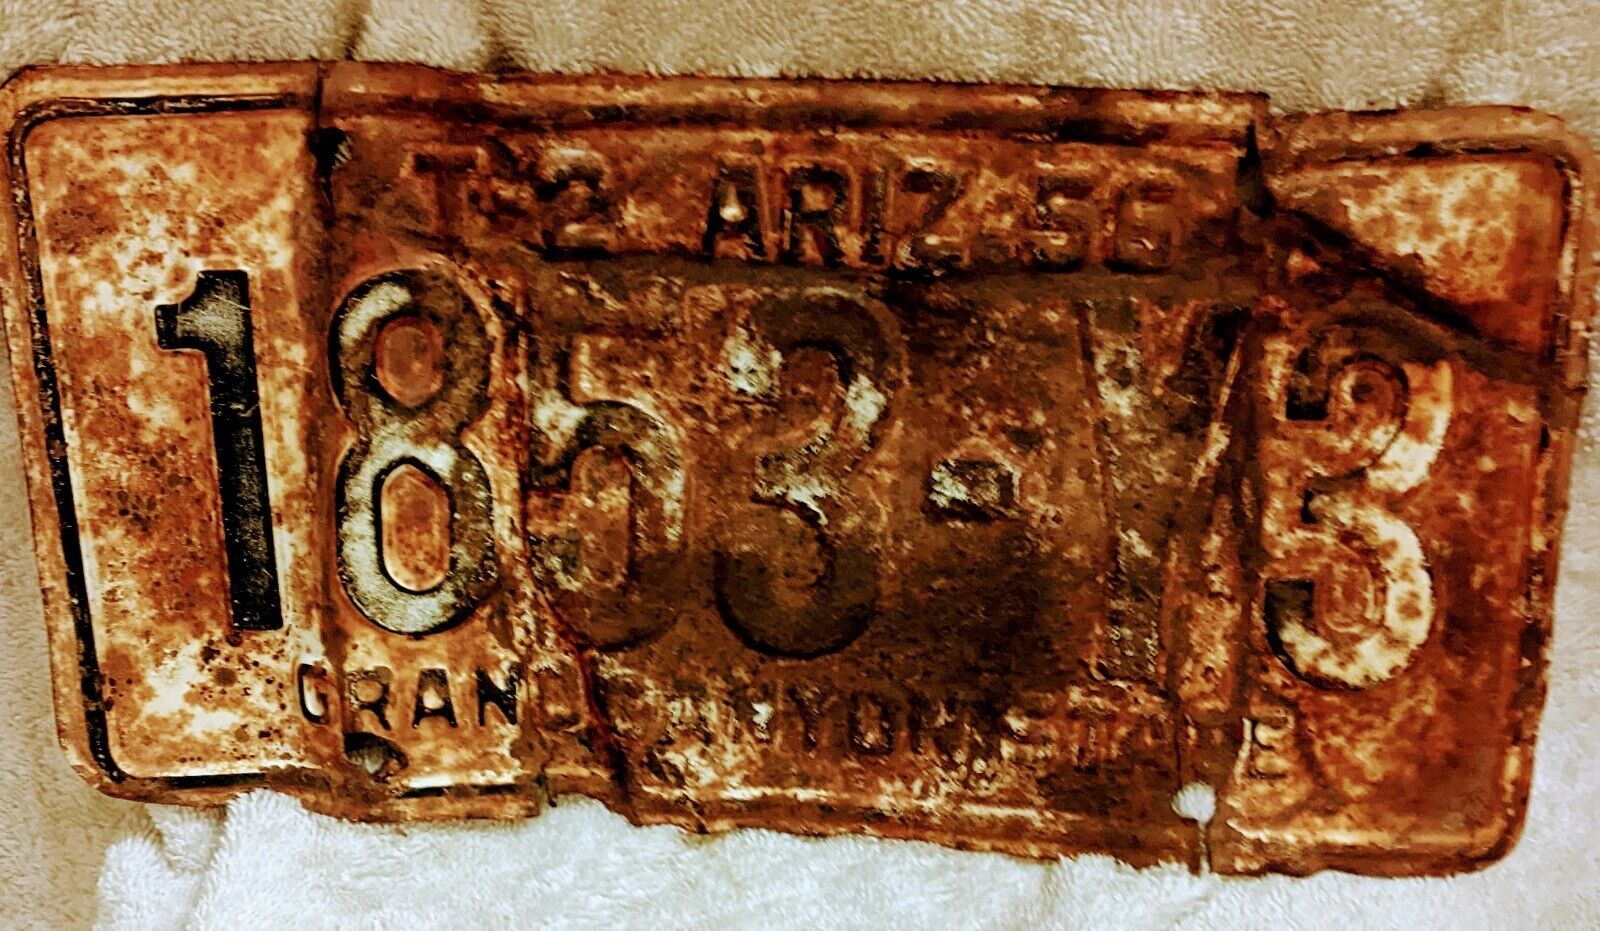 1956 Arizona License Plate 1853-Y3 in rough slightly bent condition, readable,